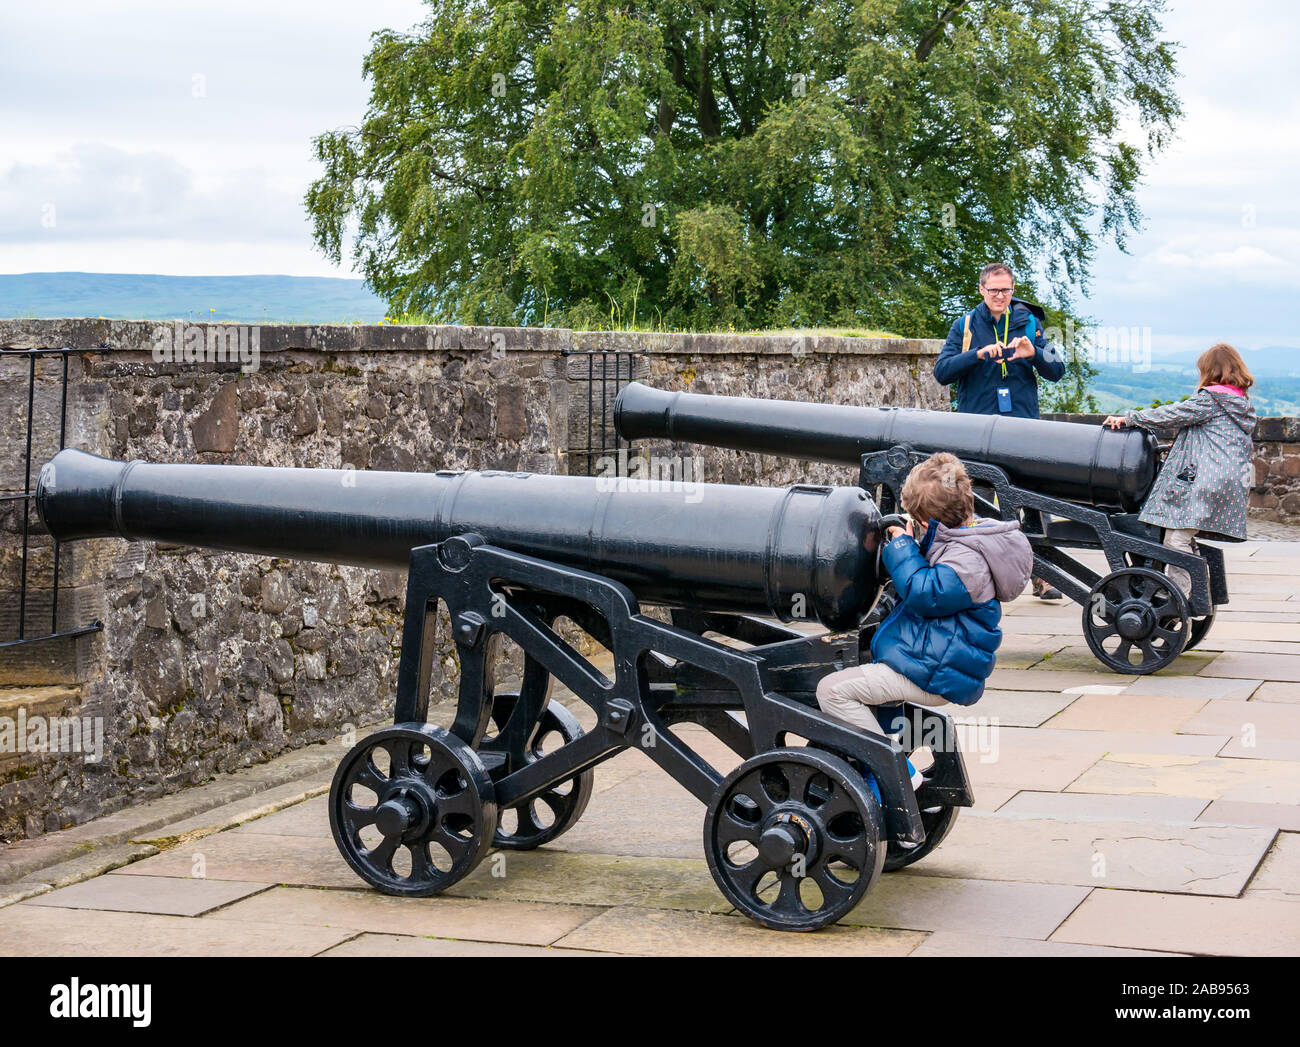 Family with father and children playing on old artillery cannons or guns on Grand Battery, Stirling Castle, Scotland, UK Stock Photo